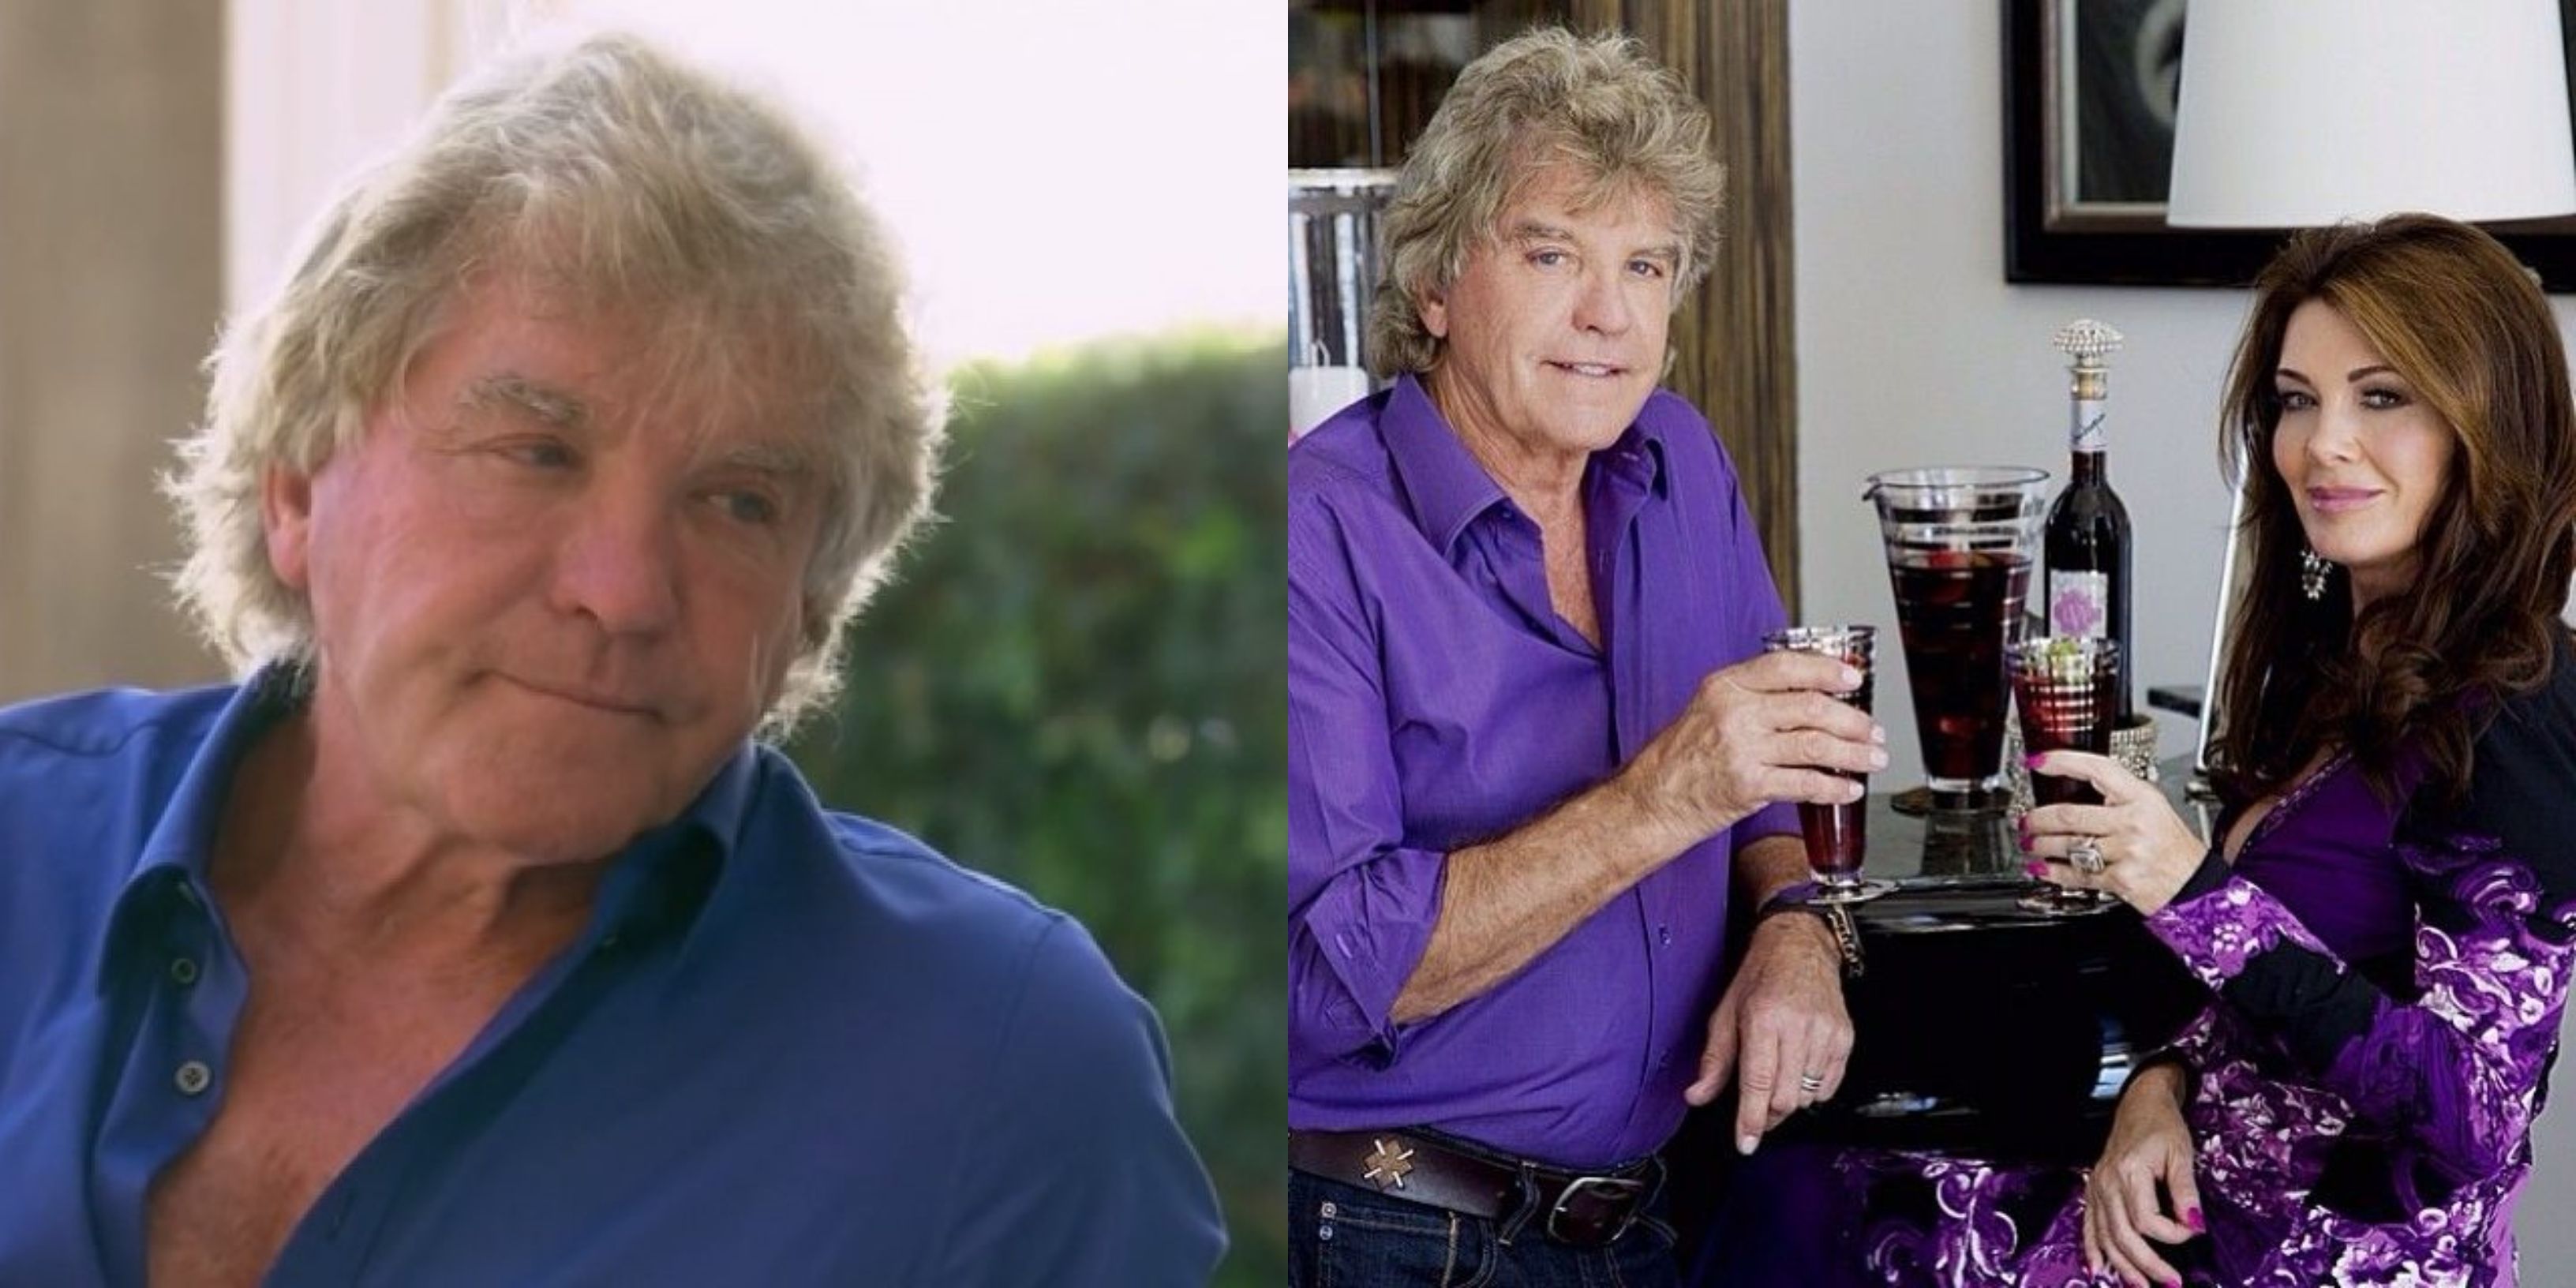 Ken Todd on The Real Housewives of Beverly Hills